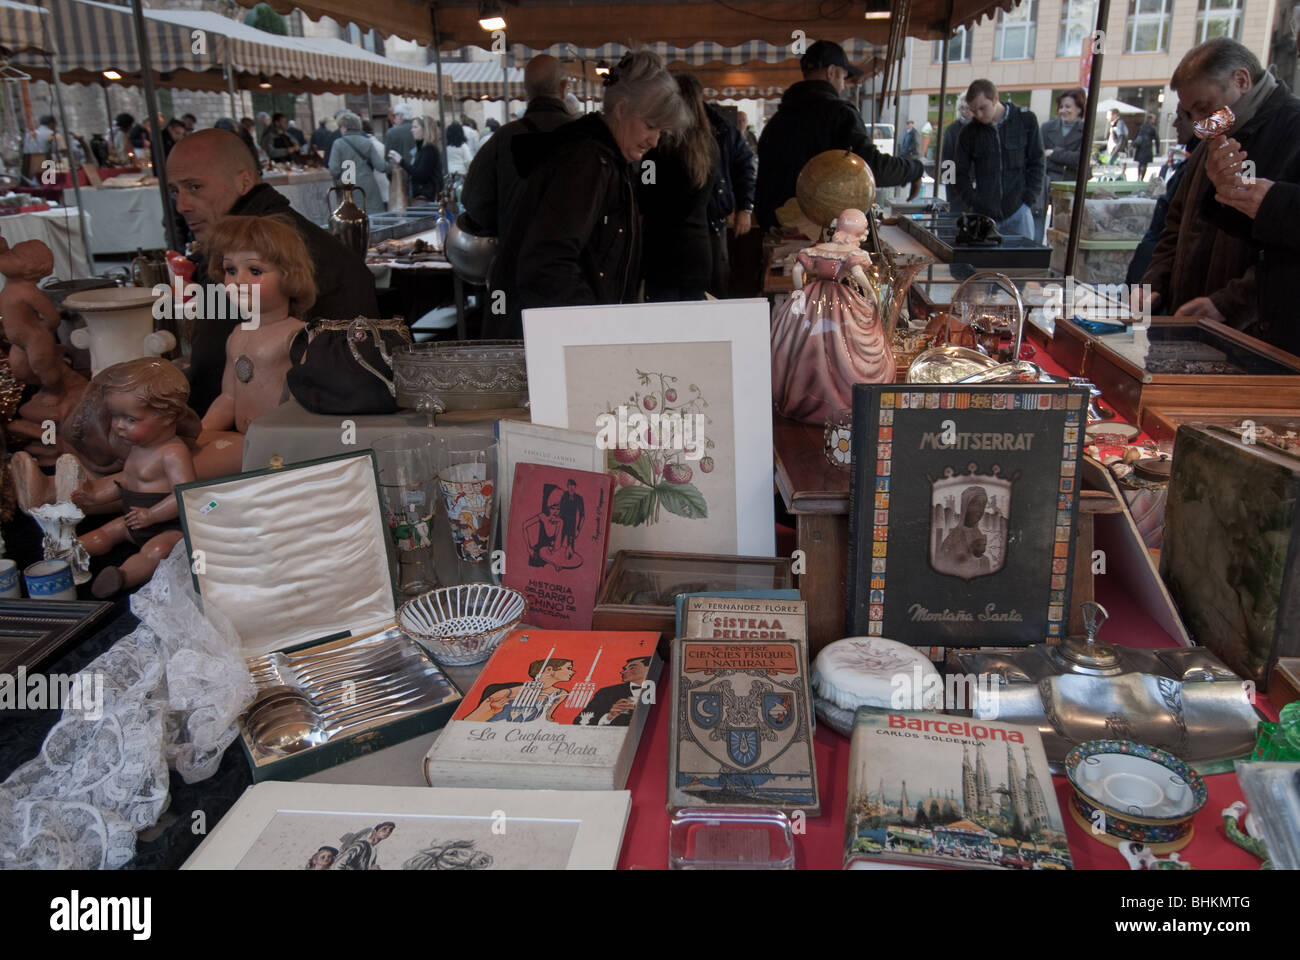 Bric a brac and antiques for sale at a fle market in barcelona. Stock Photo